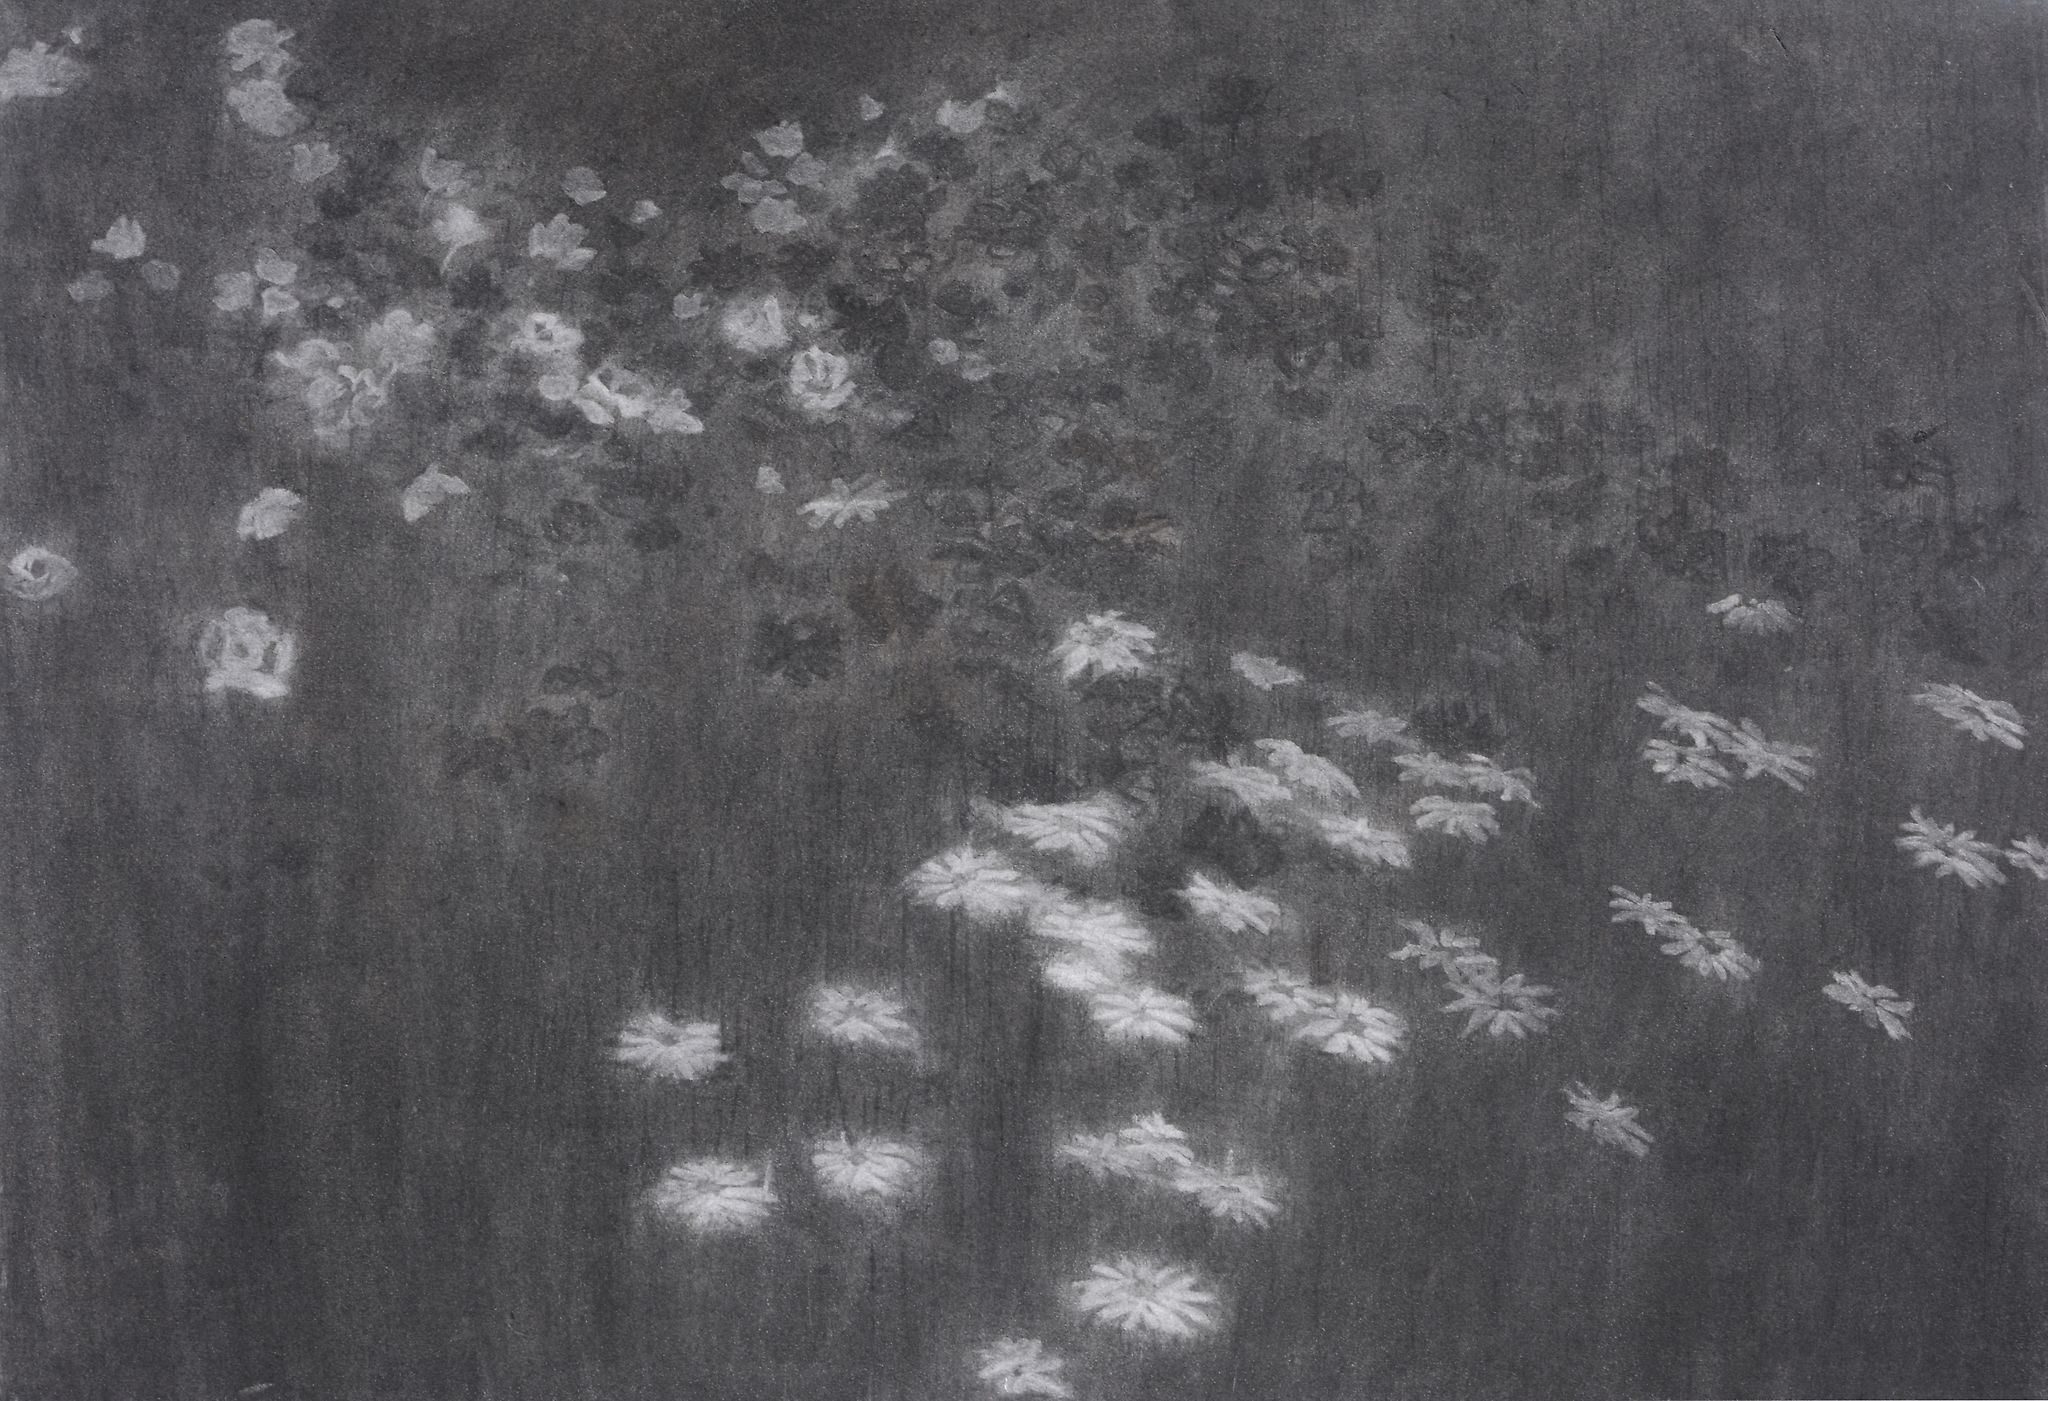 Edward Middleditch (1923-1987) - Garden Night; Plum Tree and Bean Field Charcoal on paper  Circa - Image 2 of 6